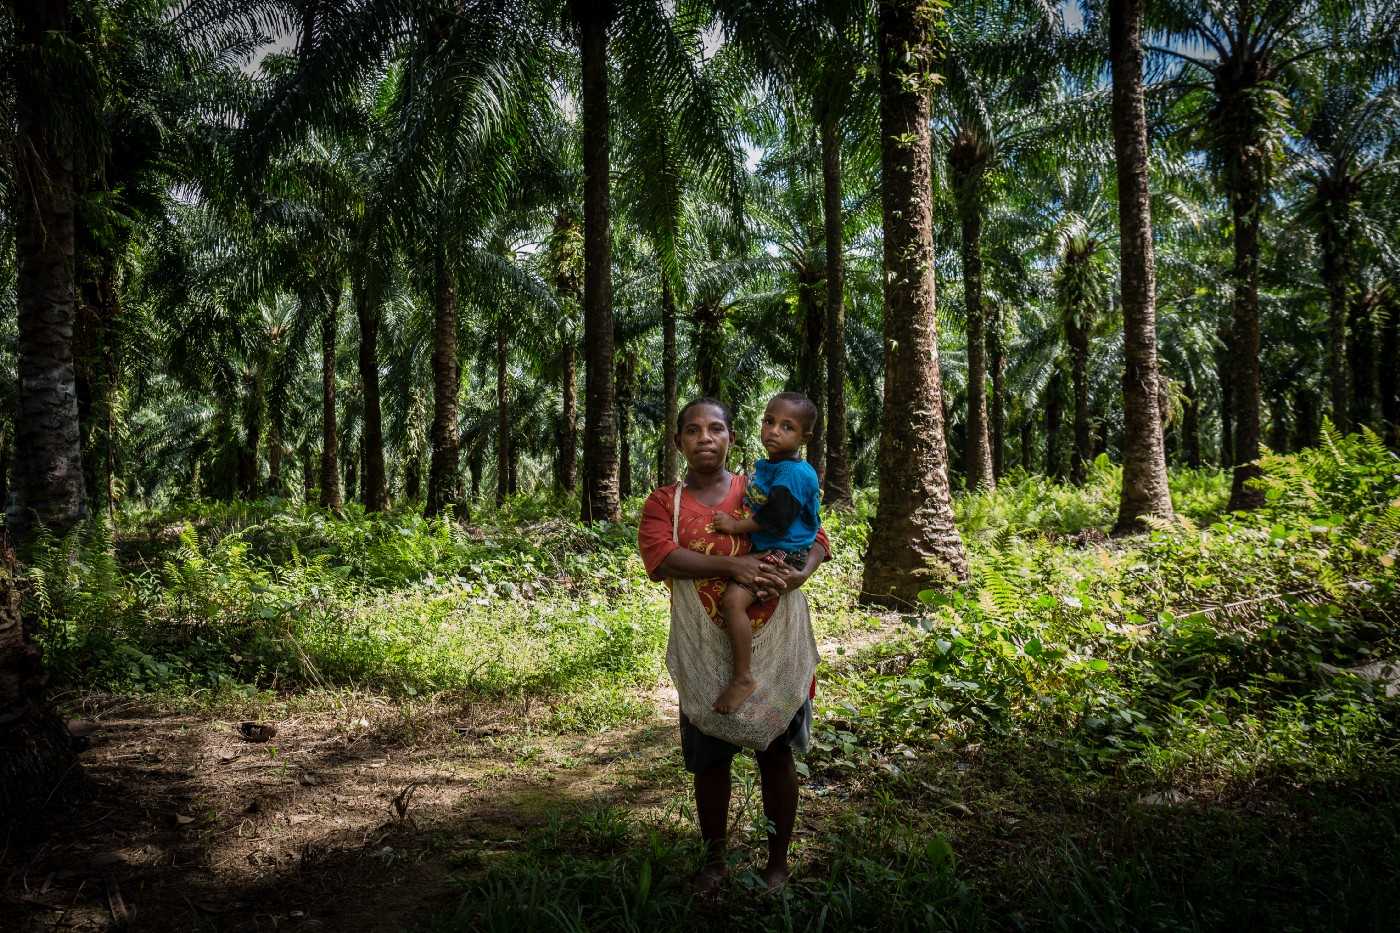 Angelina Ketang, 29, works as a labourer in an oil palm plantation.